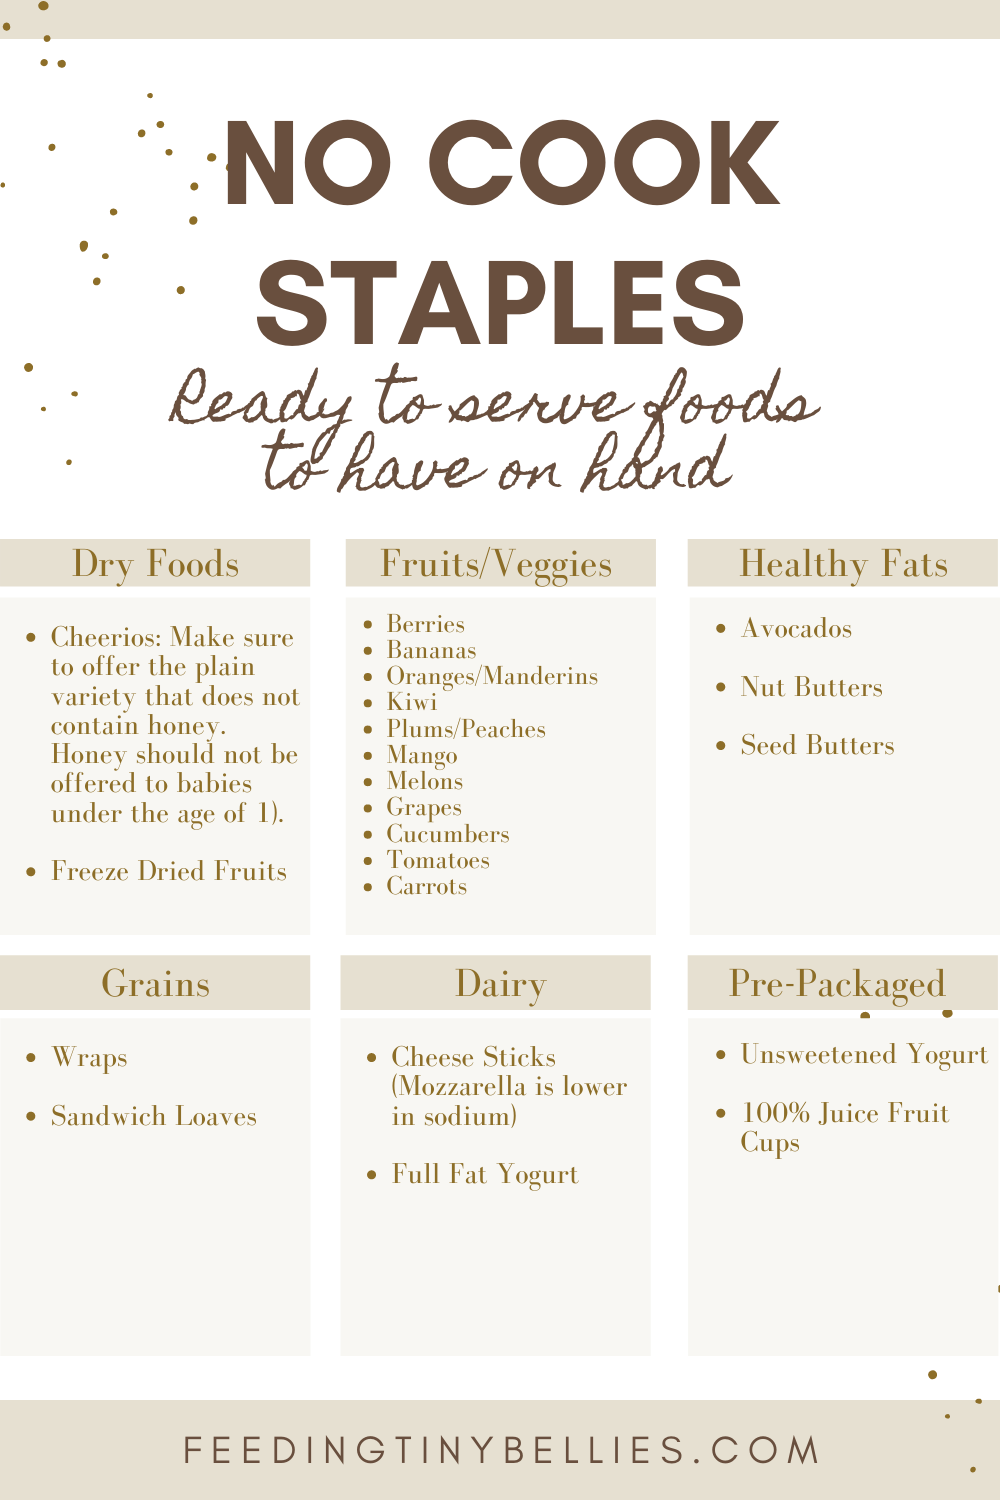 No cook staples - Ready to serve foods to have on hand